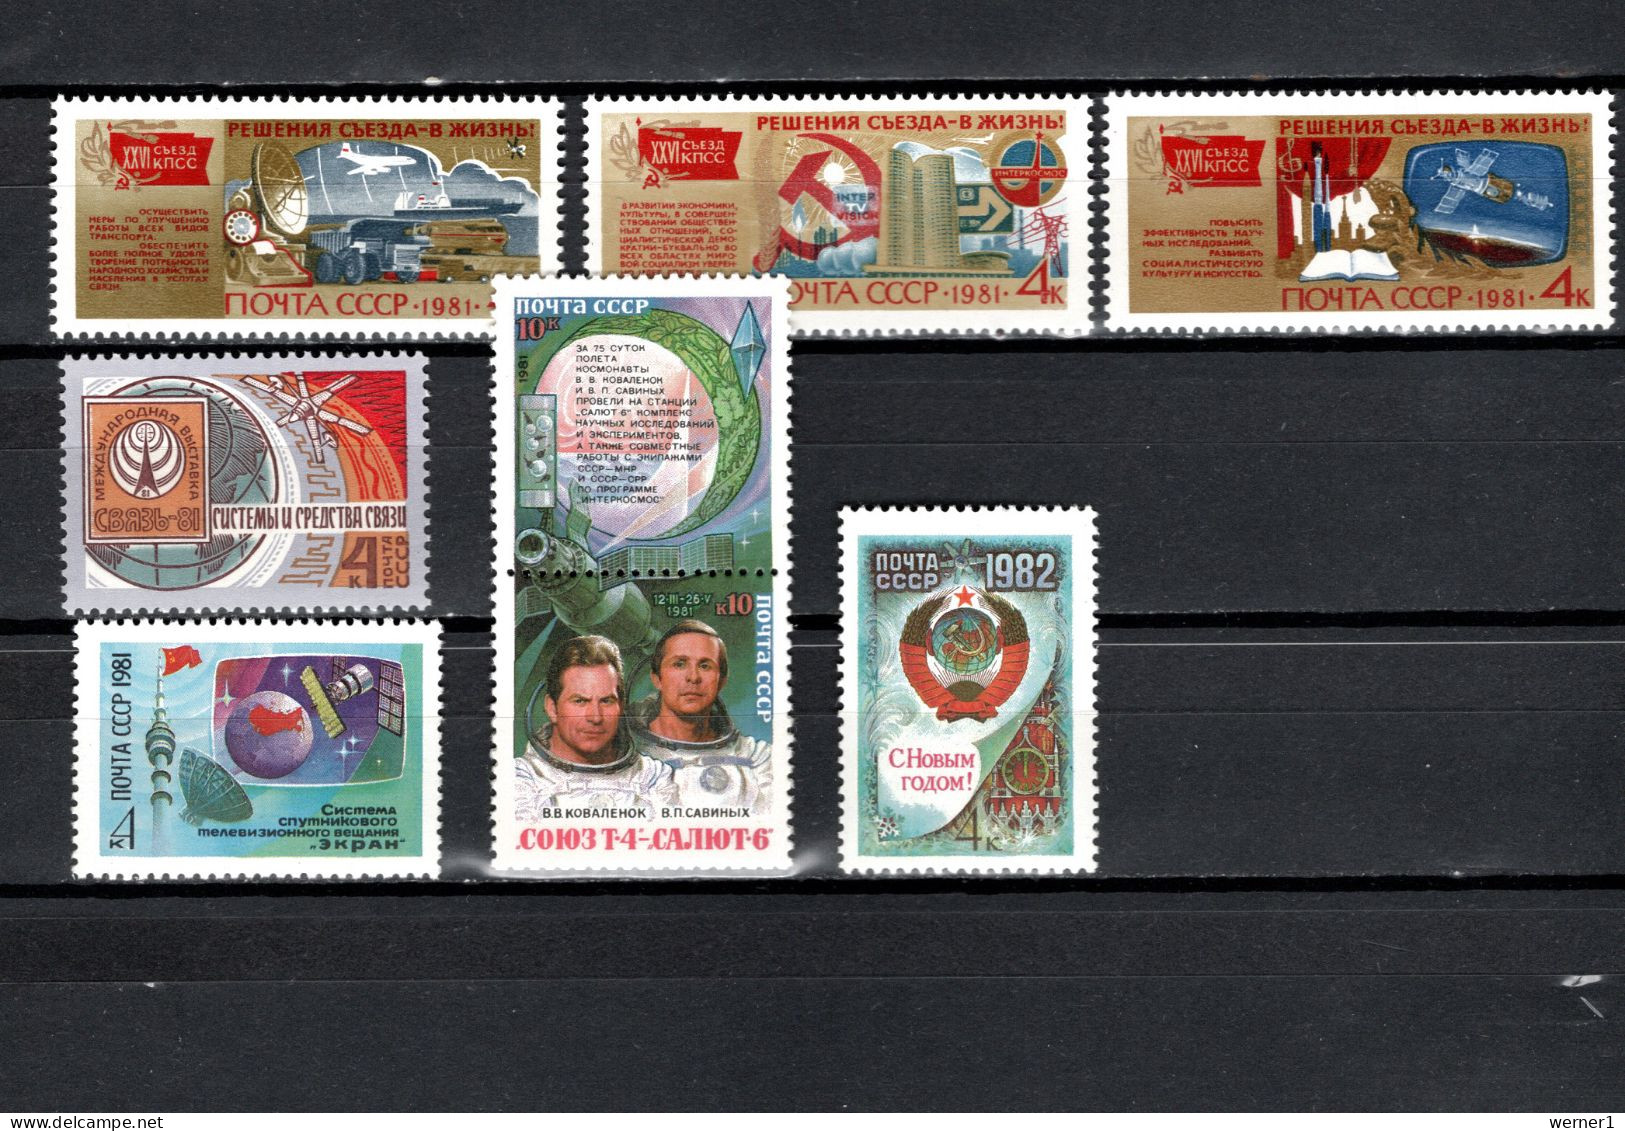 USSR Russia 1981 Space, Communist Party Congress, SWJAS '81, Ekran Satellite, Saljut 6, New Year 8 Stamps MNH - Rusia & URSS